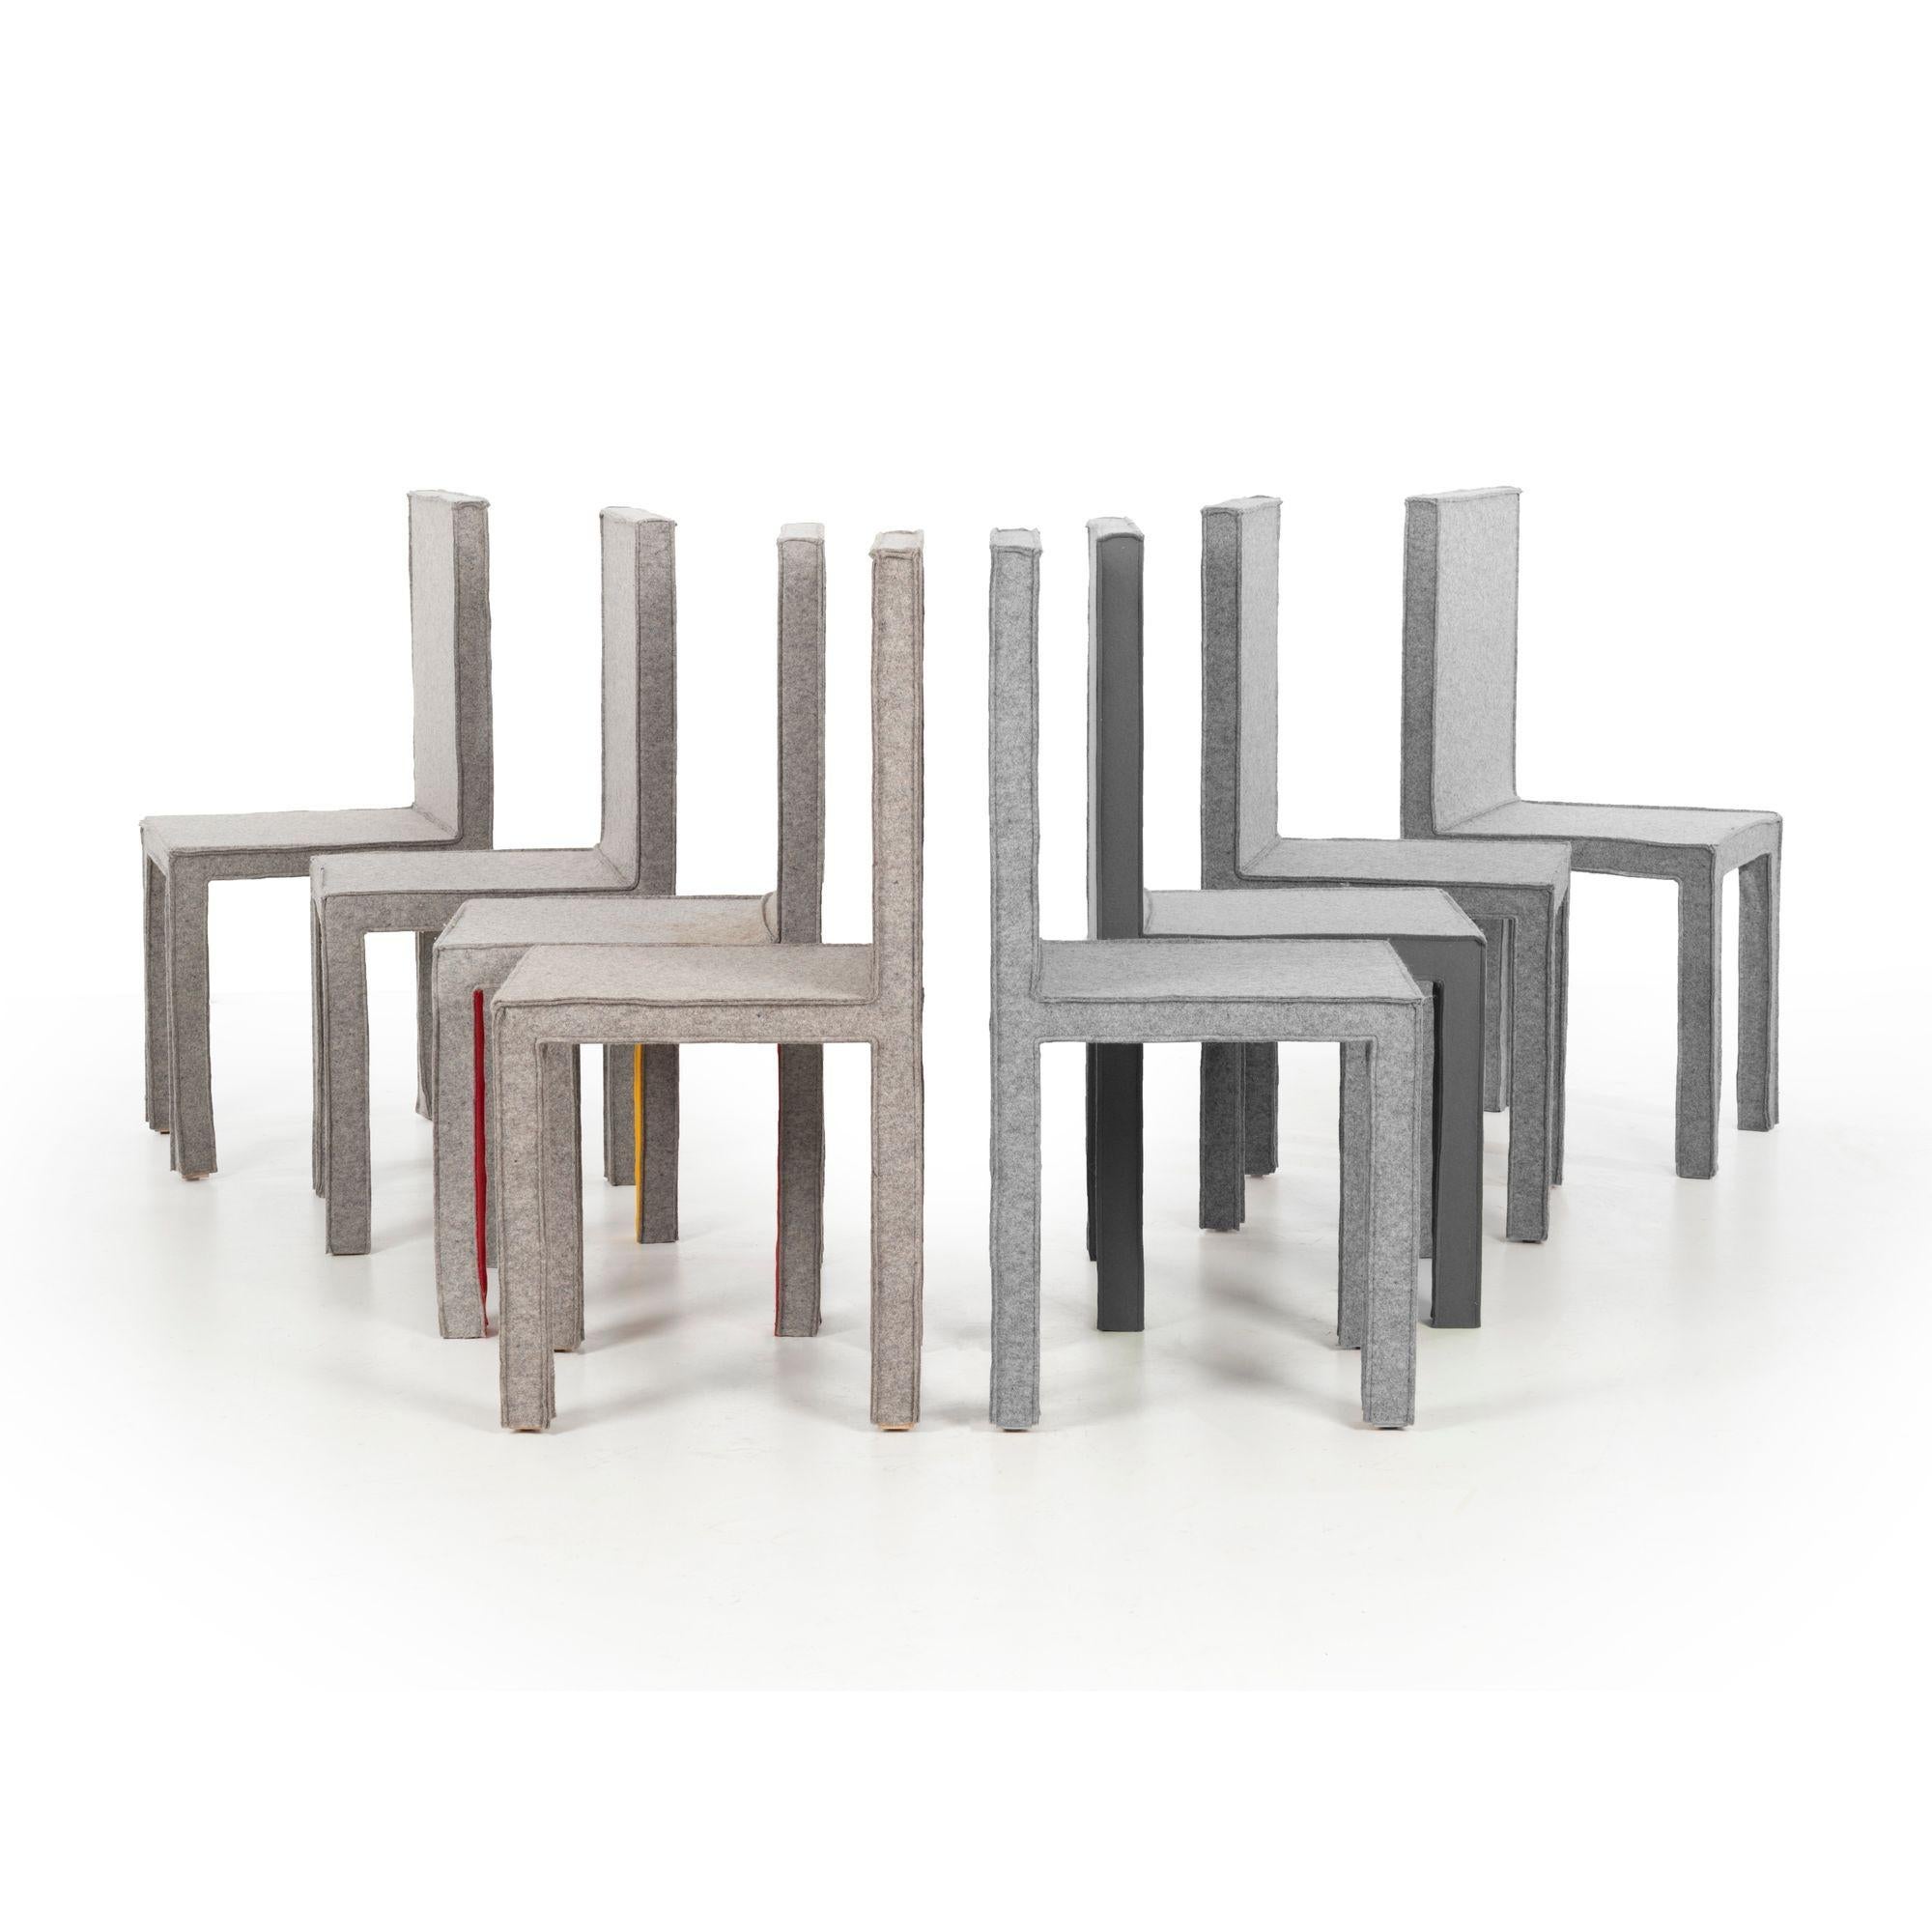 Reed and Delphine Krakoff RKDK dining chairs, set of eight for Established & Sons/ London 2014
Wool felt upholstery over beech wood with some chairs showing colored highlights.
Impressed decal underside.
 
 
 
Measure: seat height: 18